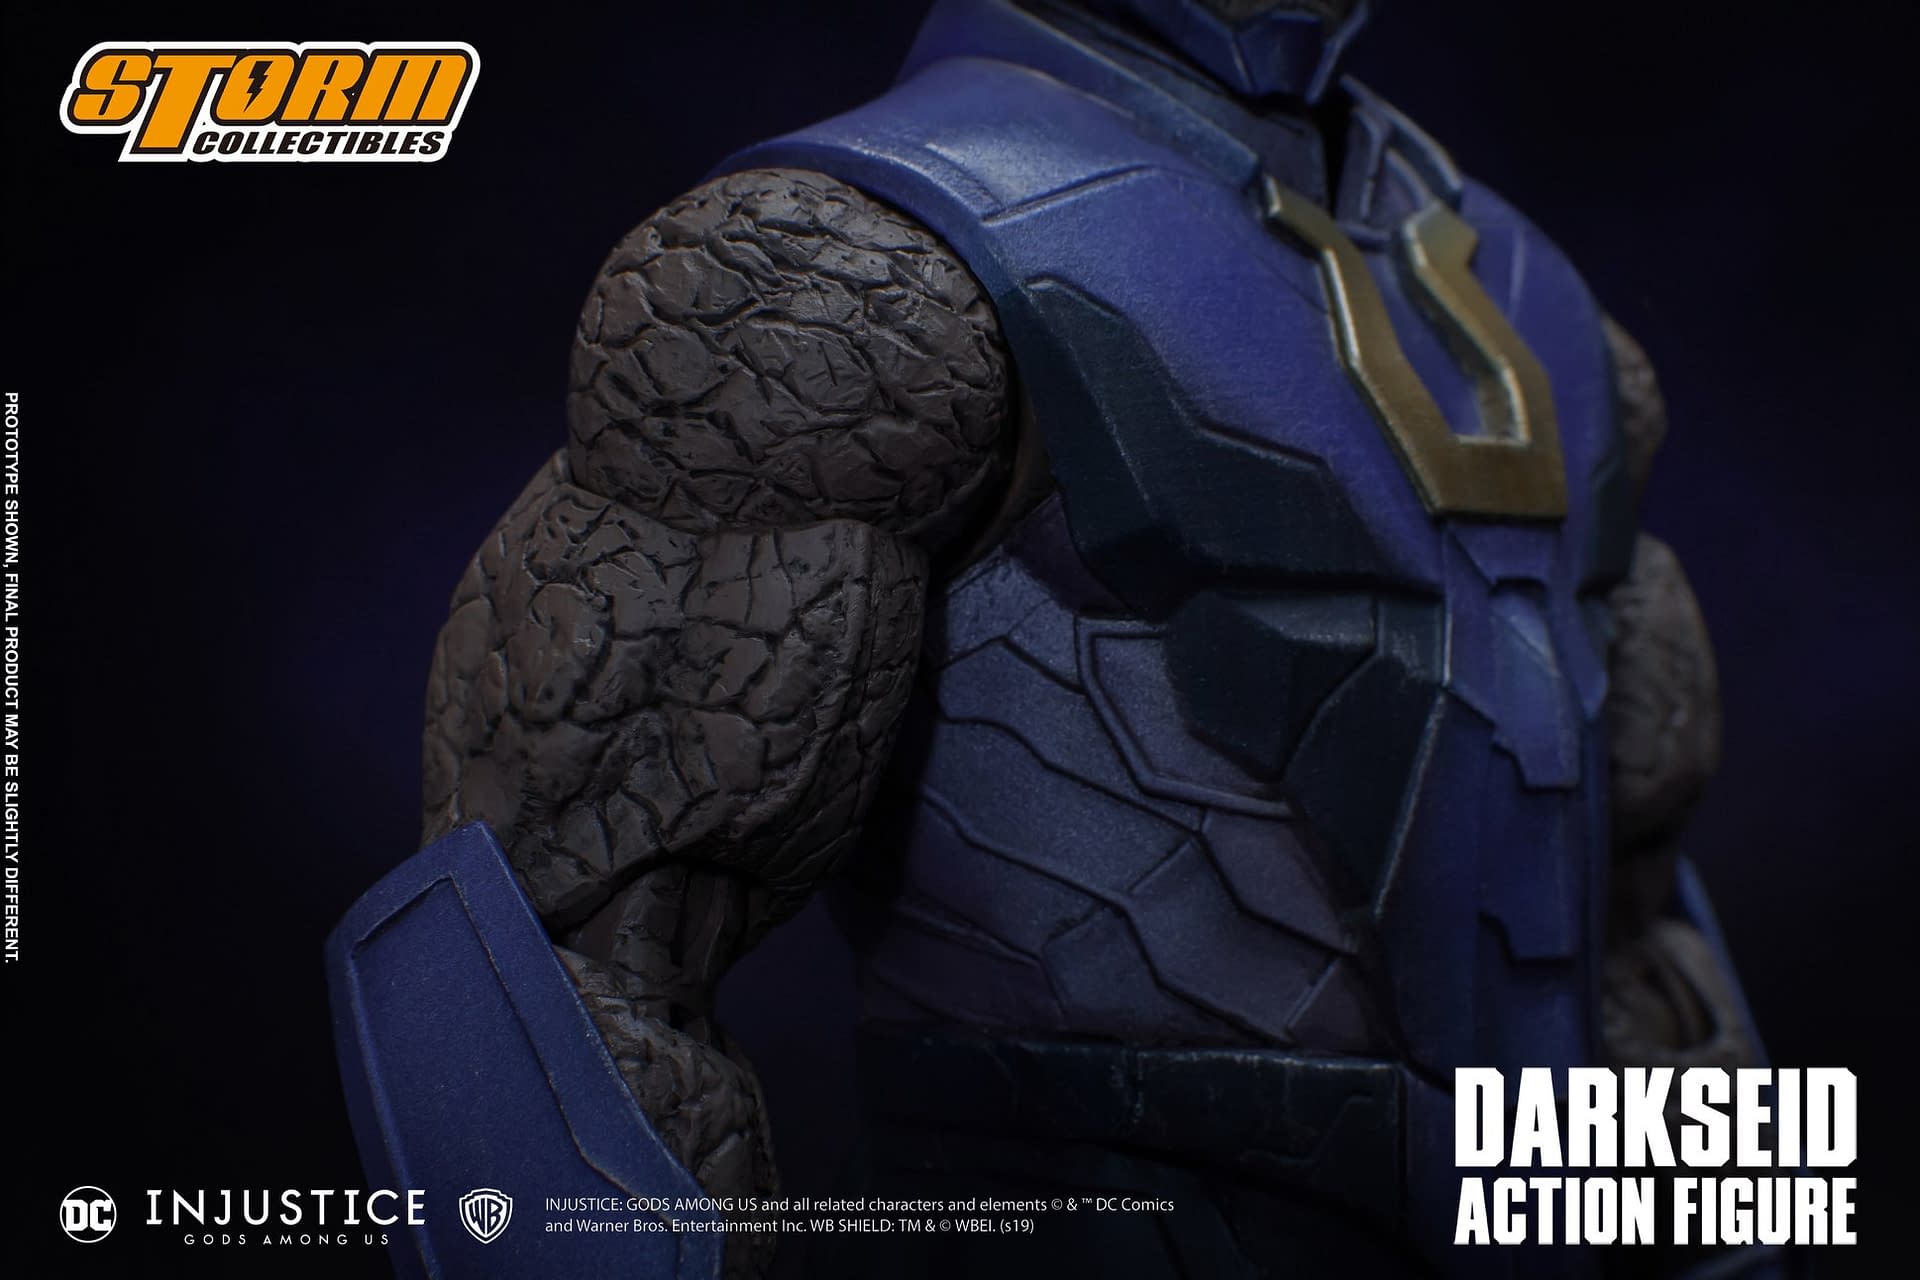 Darkseid Has Arrived in New 